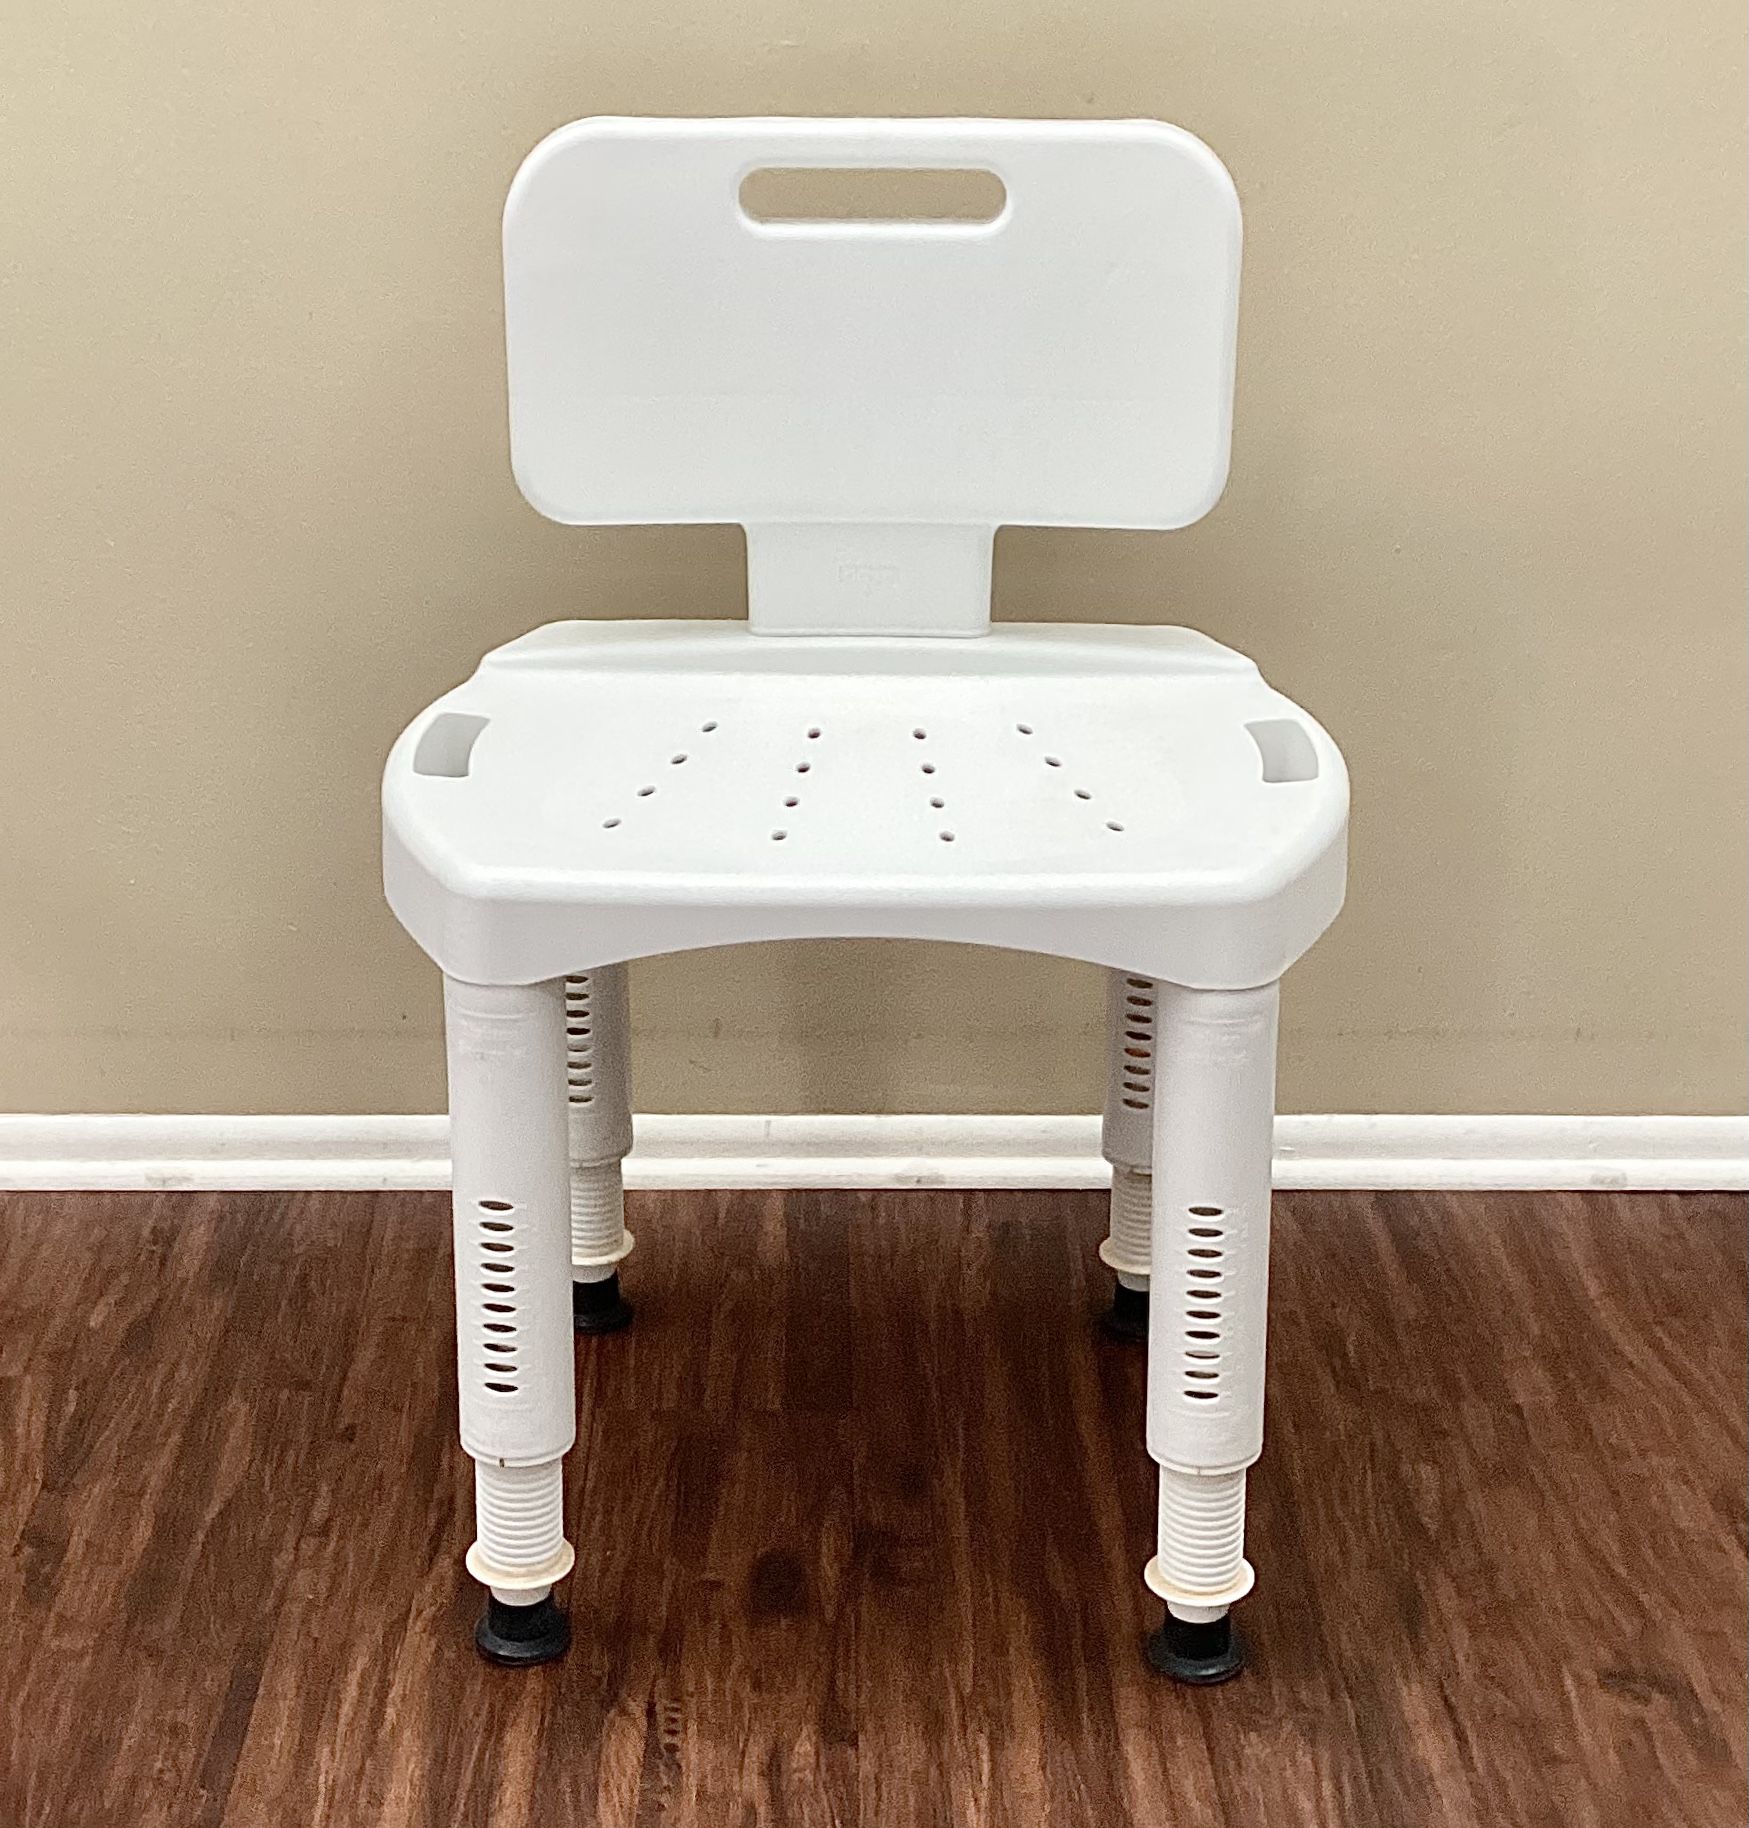 Adjustable Shower Chair With Back